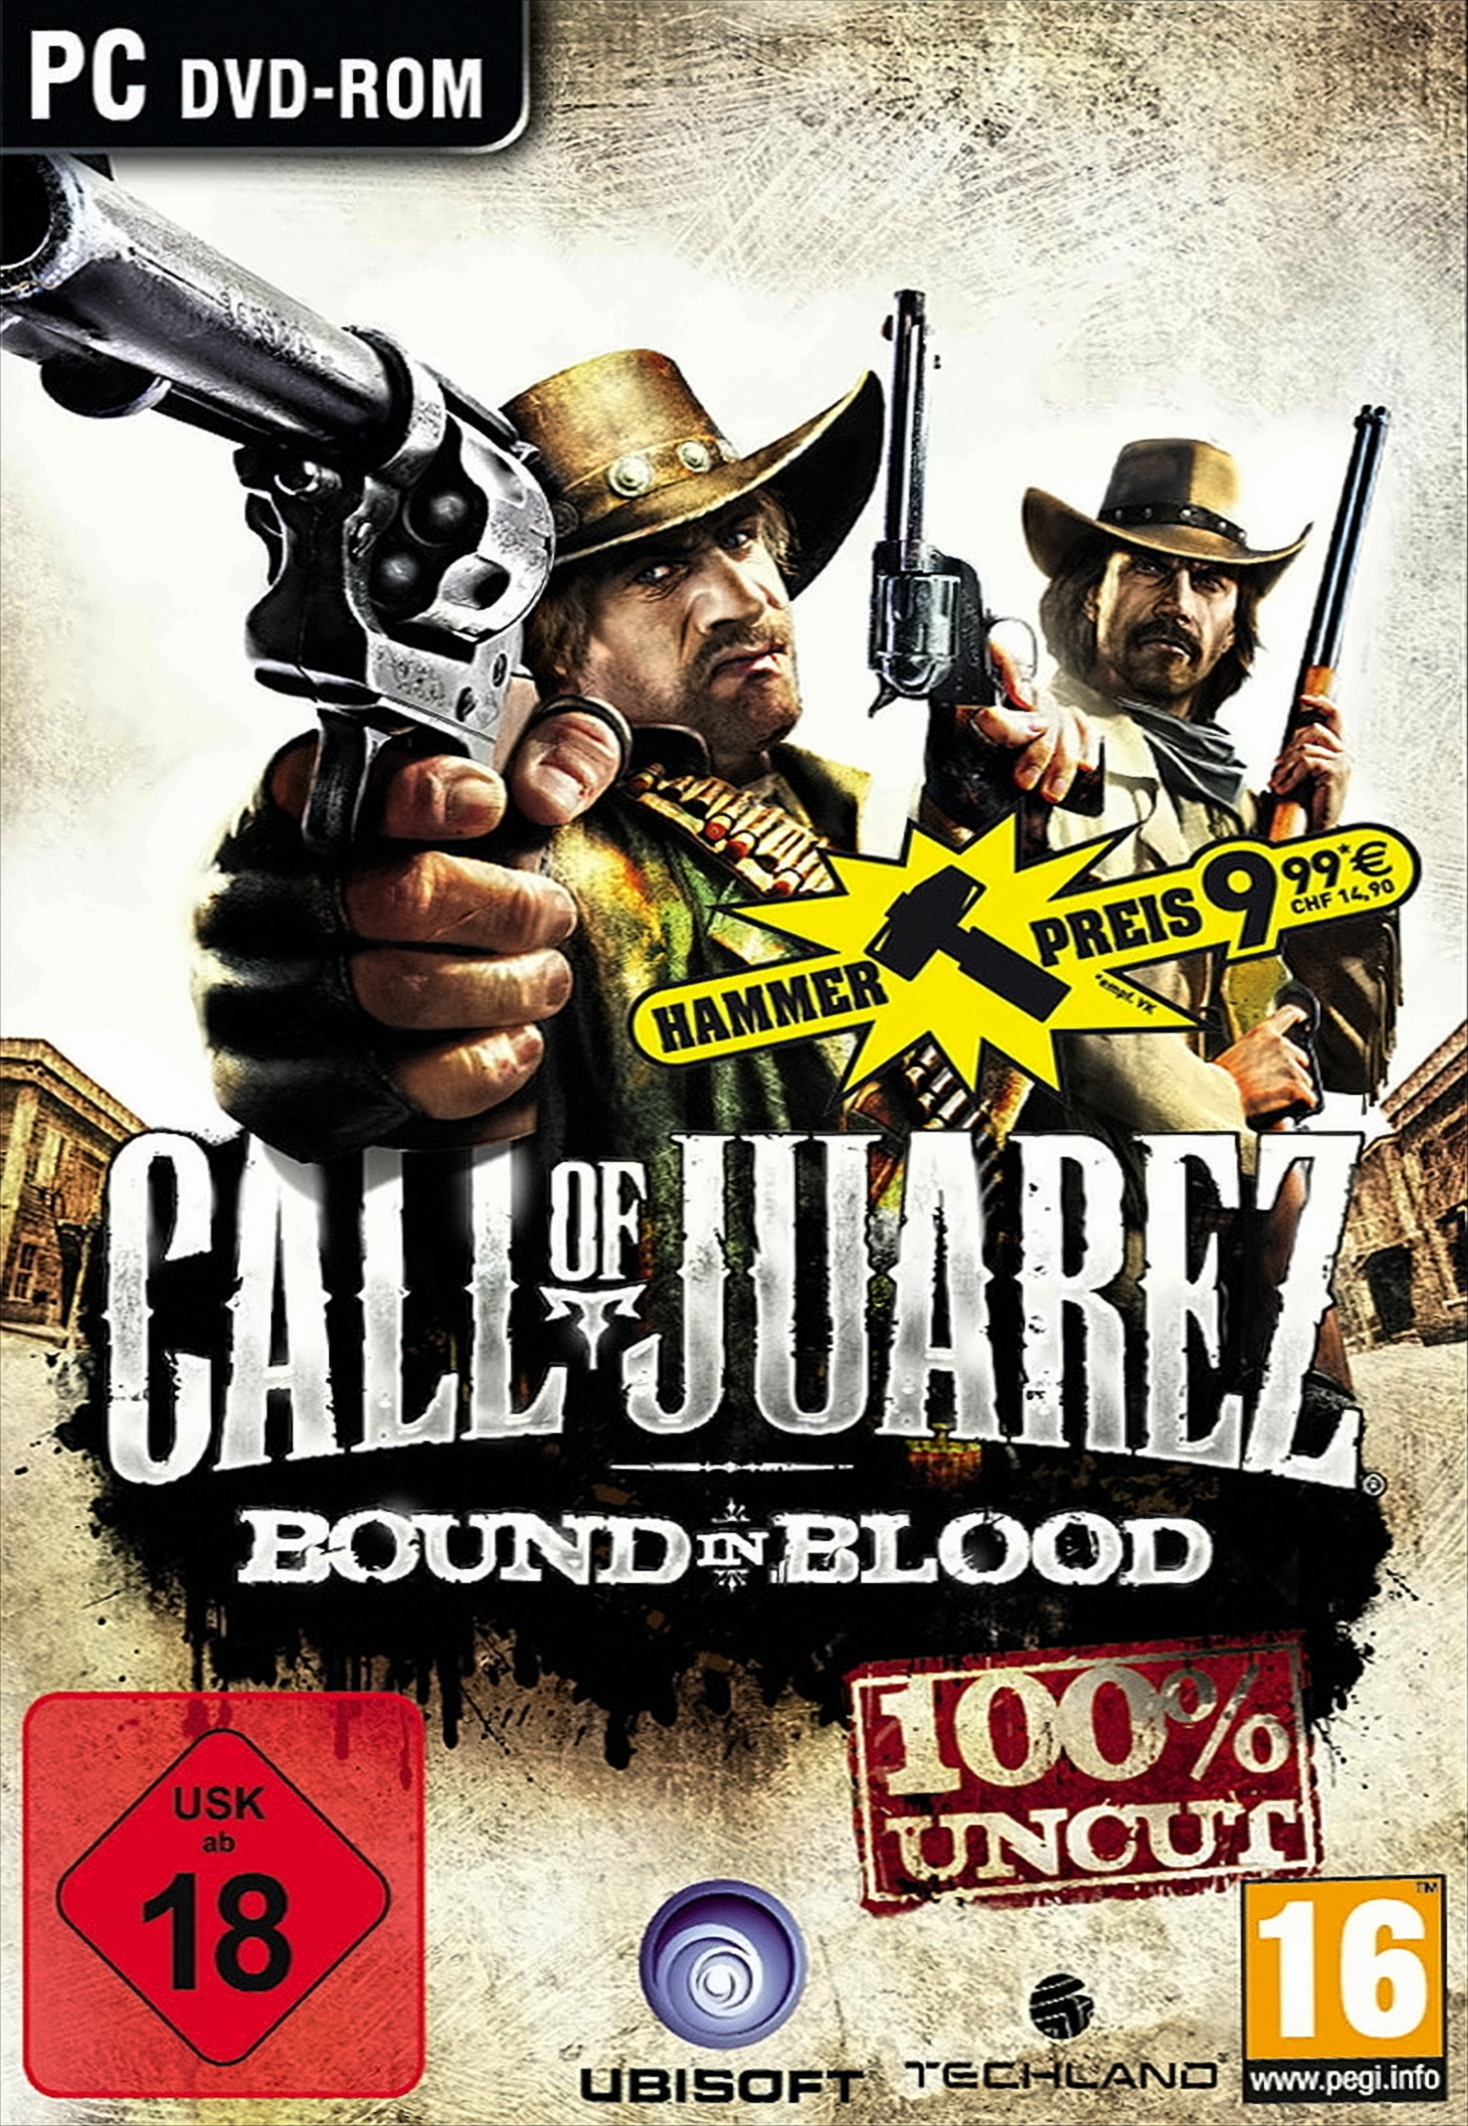 Call Of Juarez: Bound [PC] - in Blood 100% - Uncut